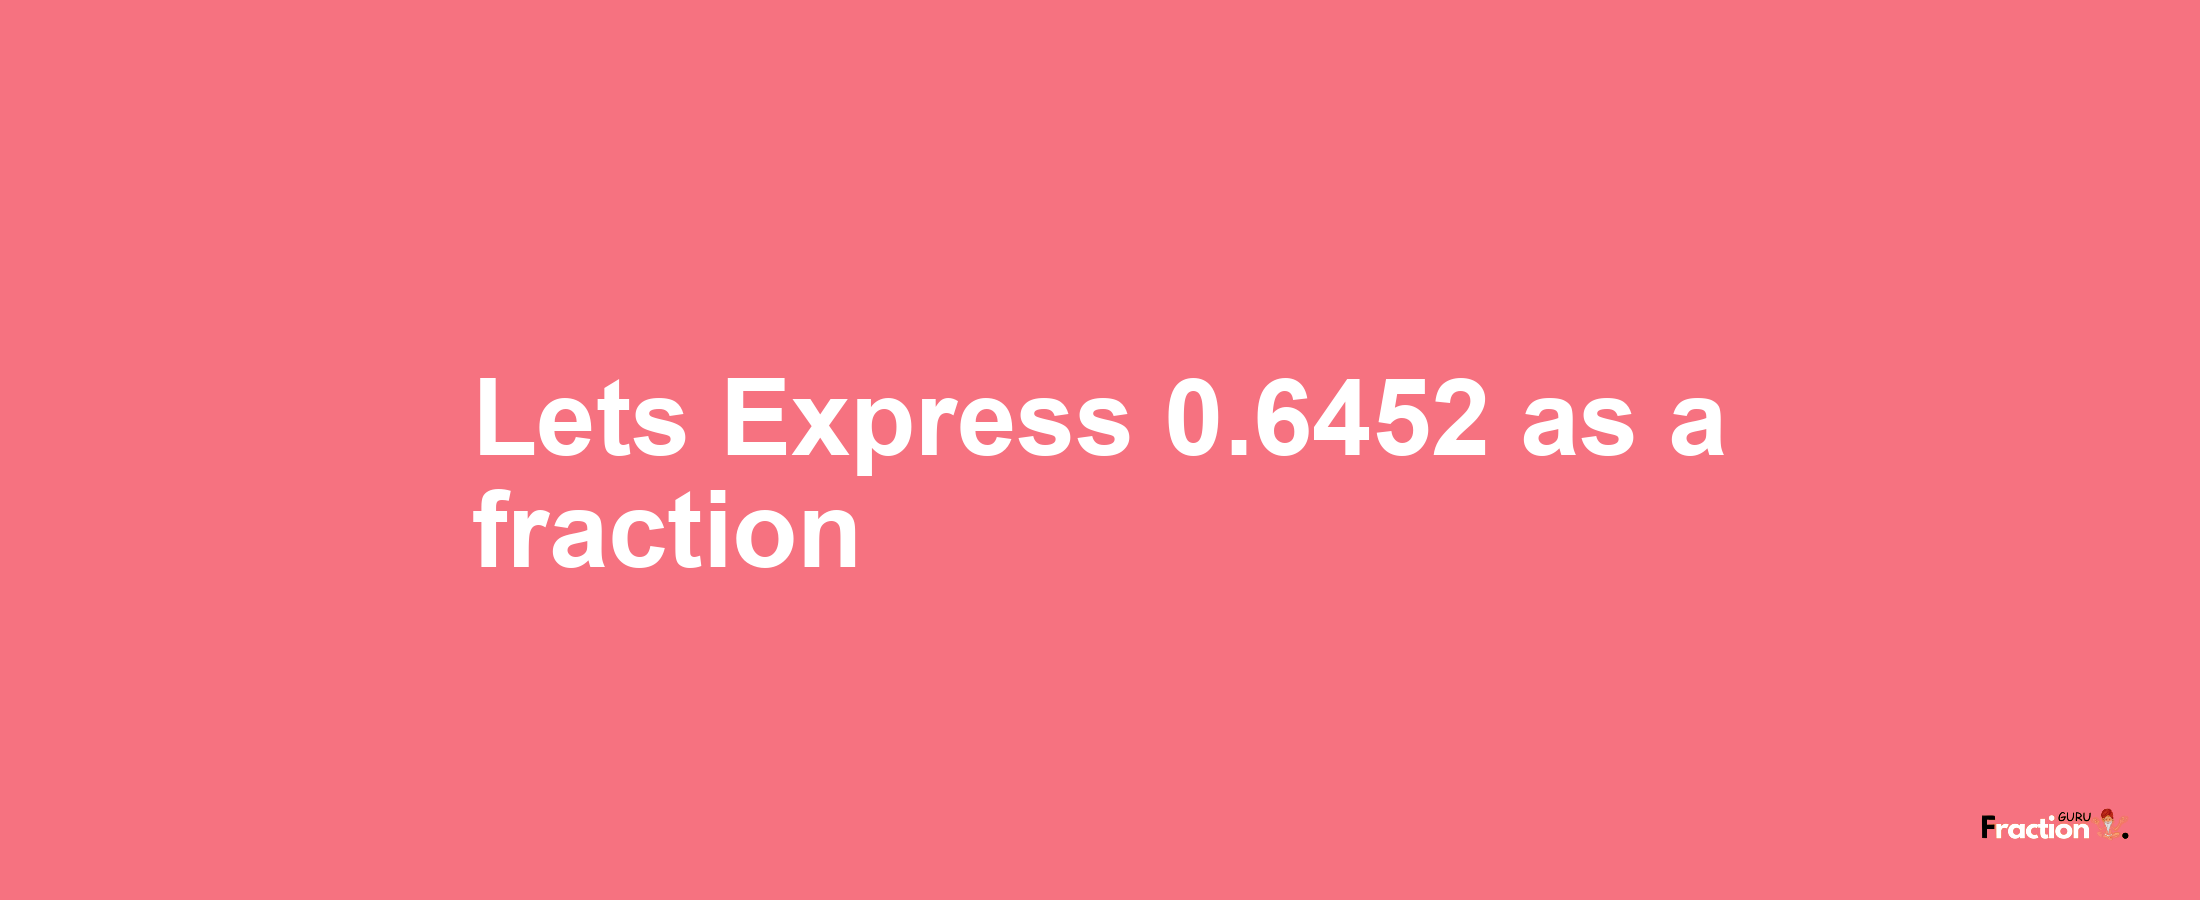 Lets Express 0.6452 as afraction